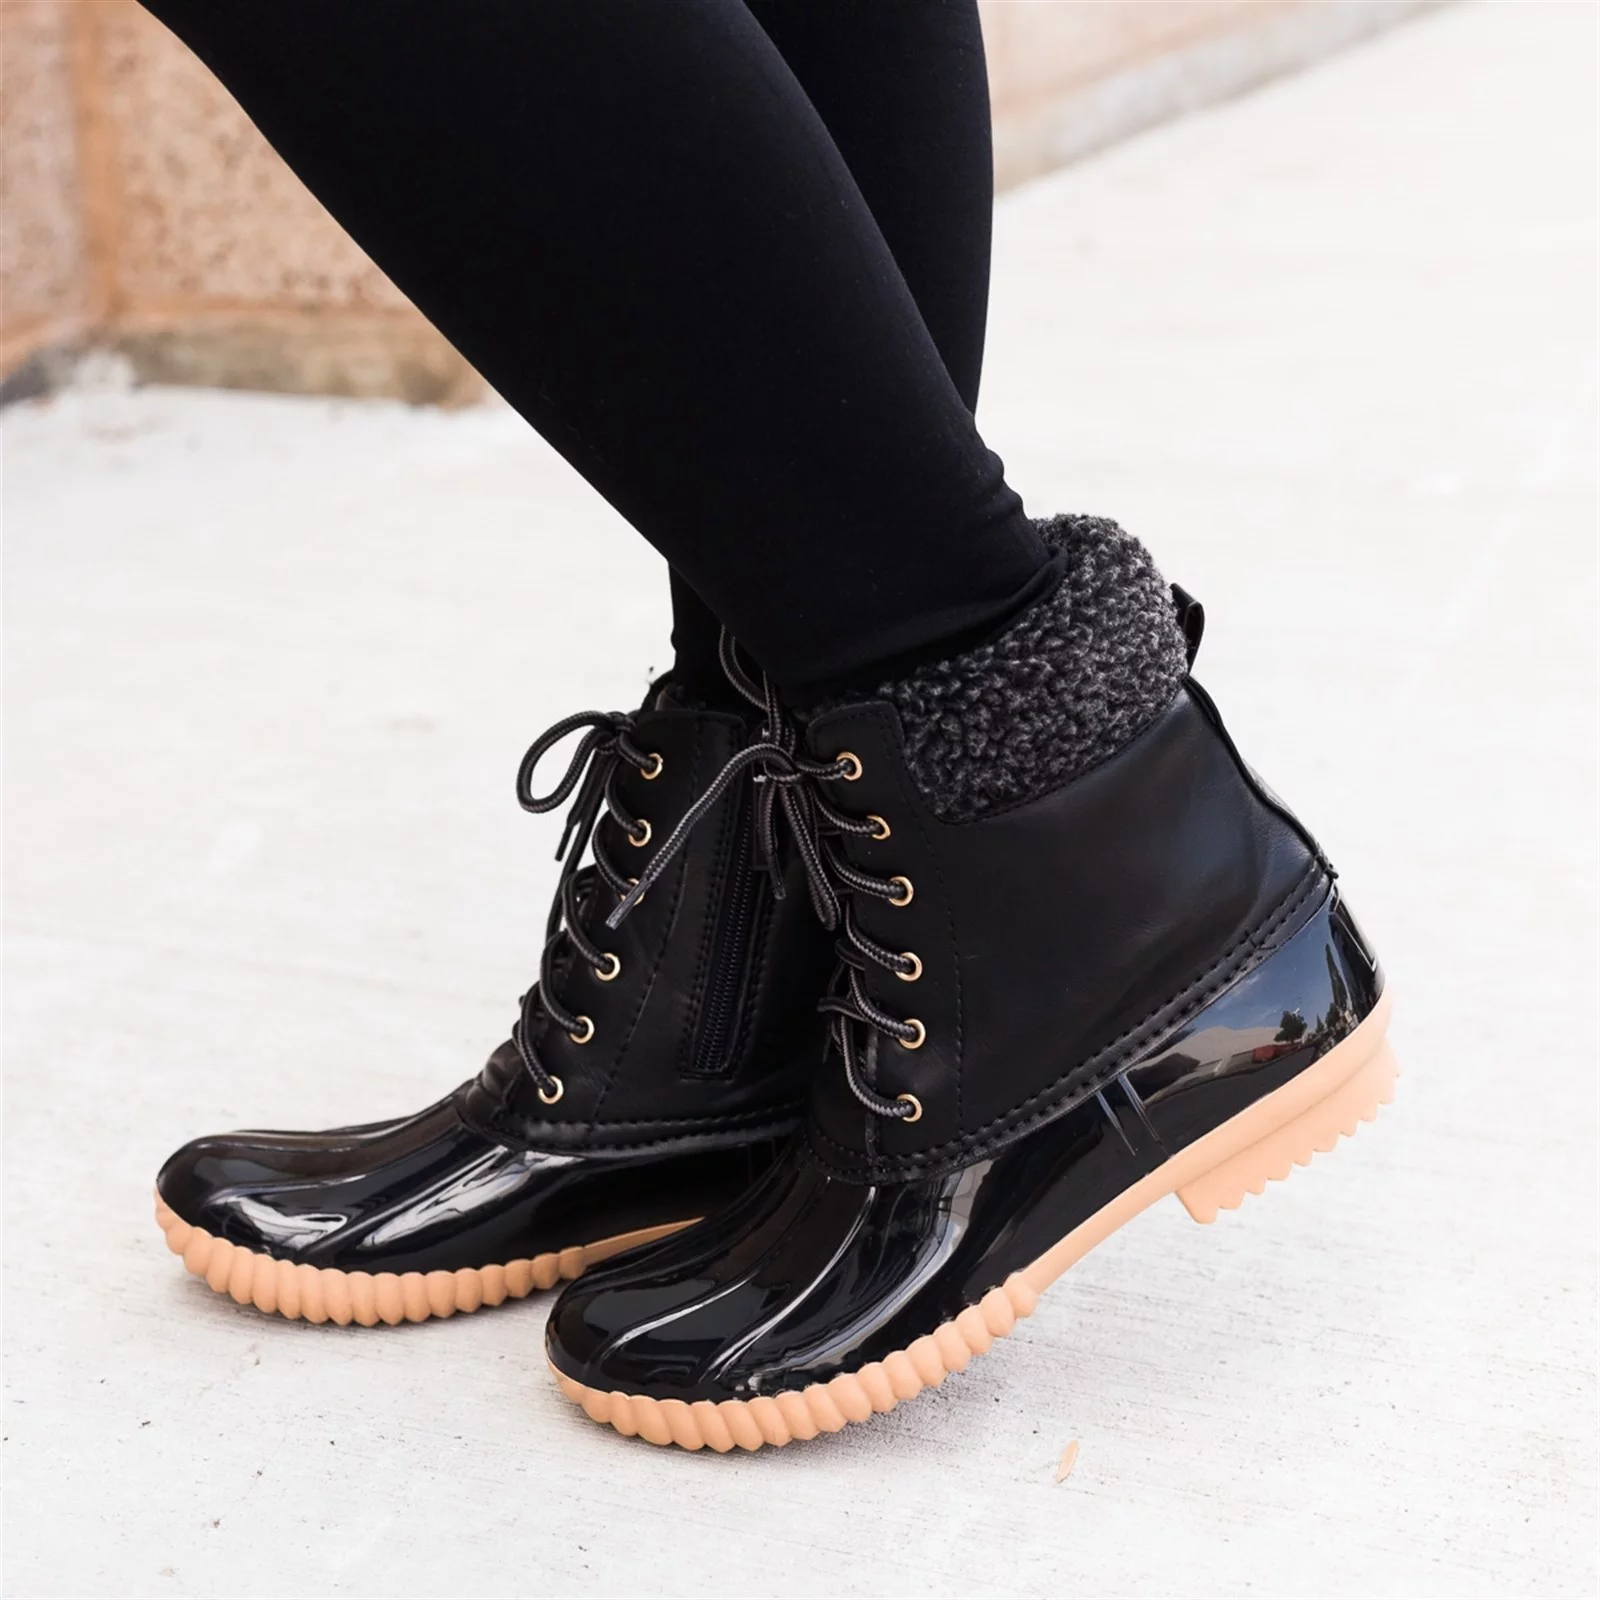 Fashion Duck Boots (2 Styles) Only $30.99!